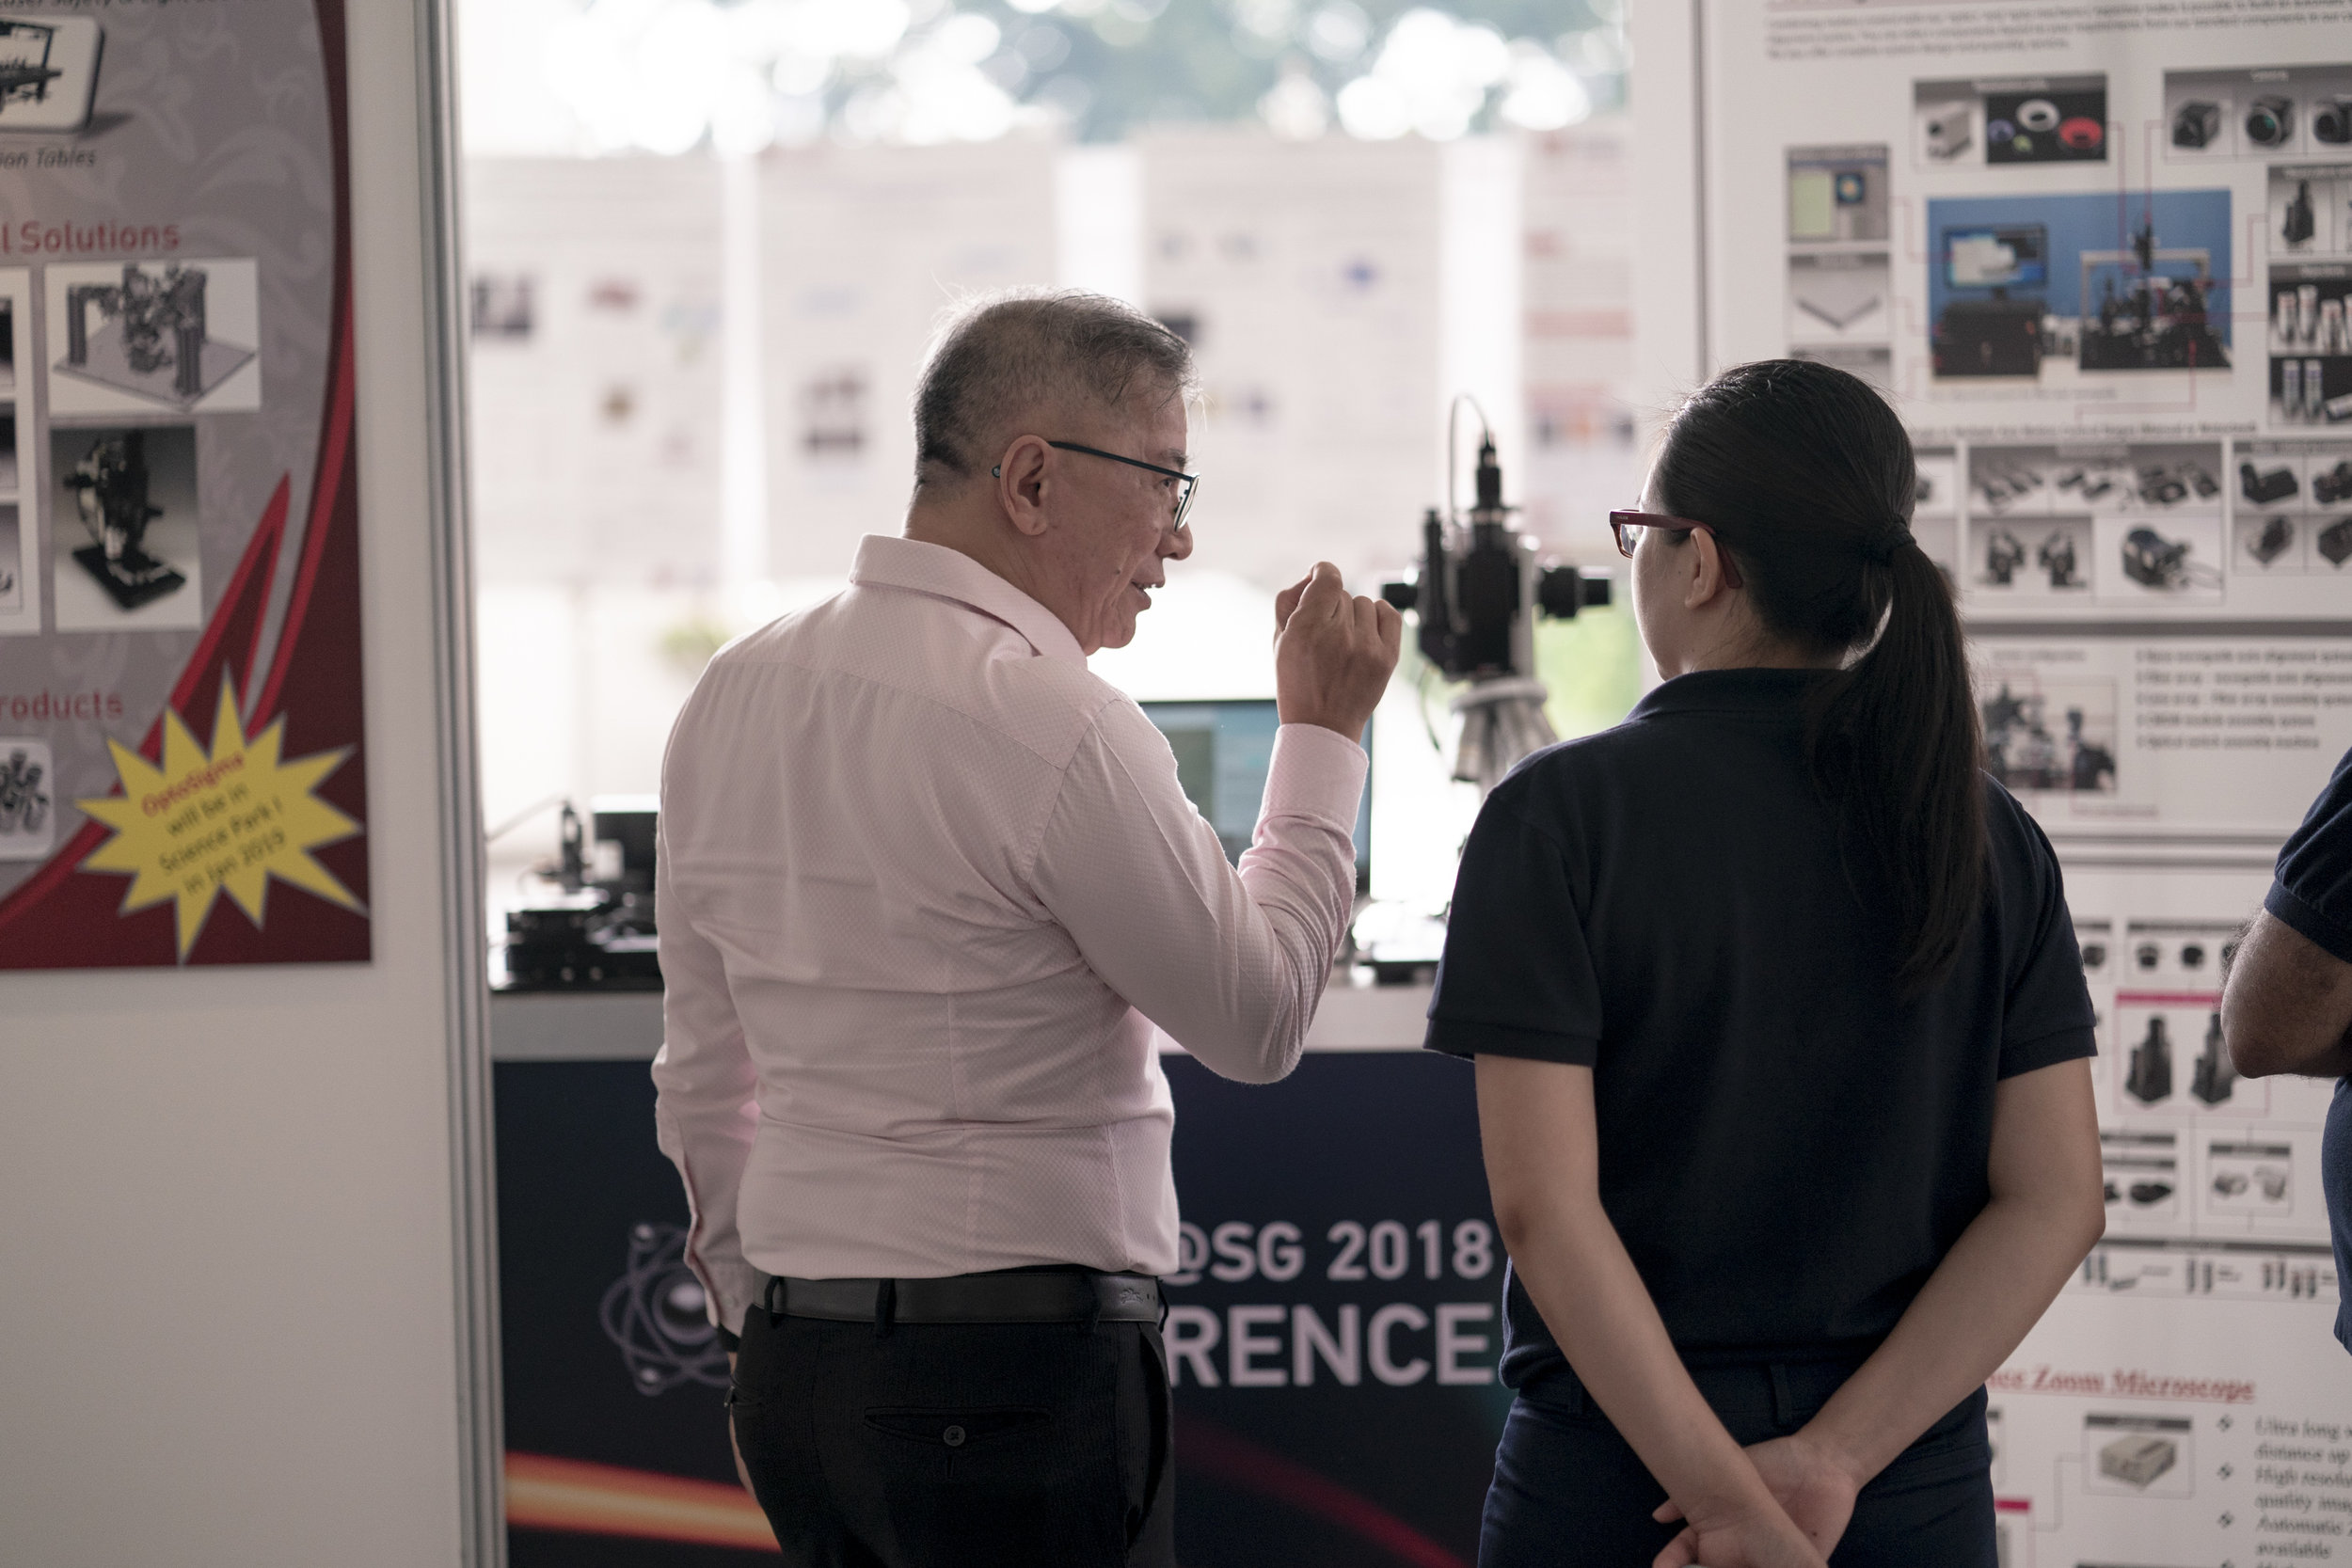 TPI Photonics SG 2018 Conference n Exhibition 0068rc.jpg